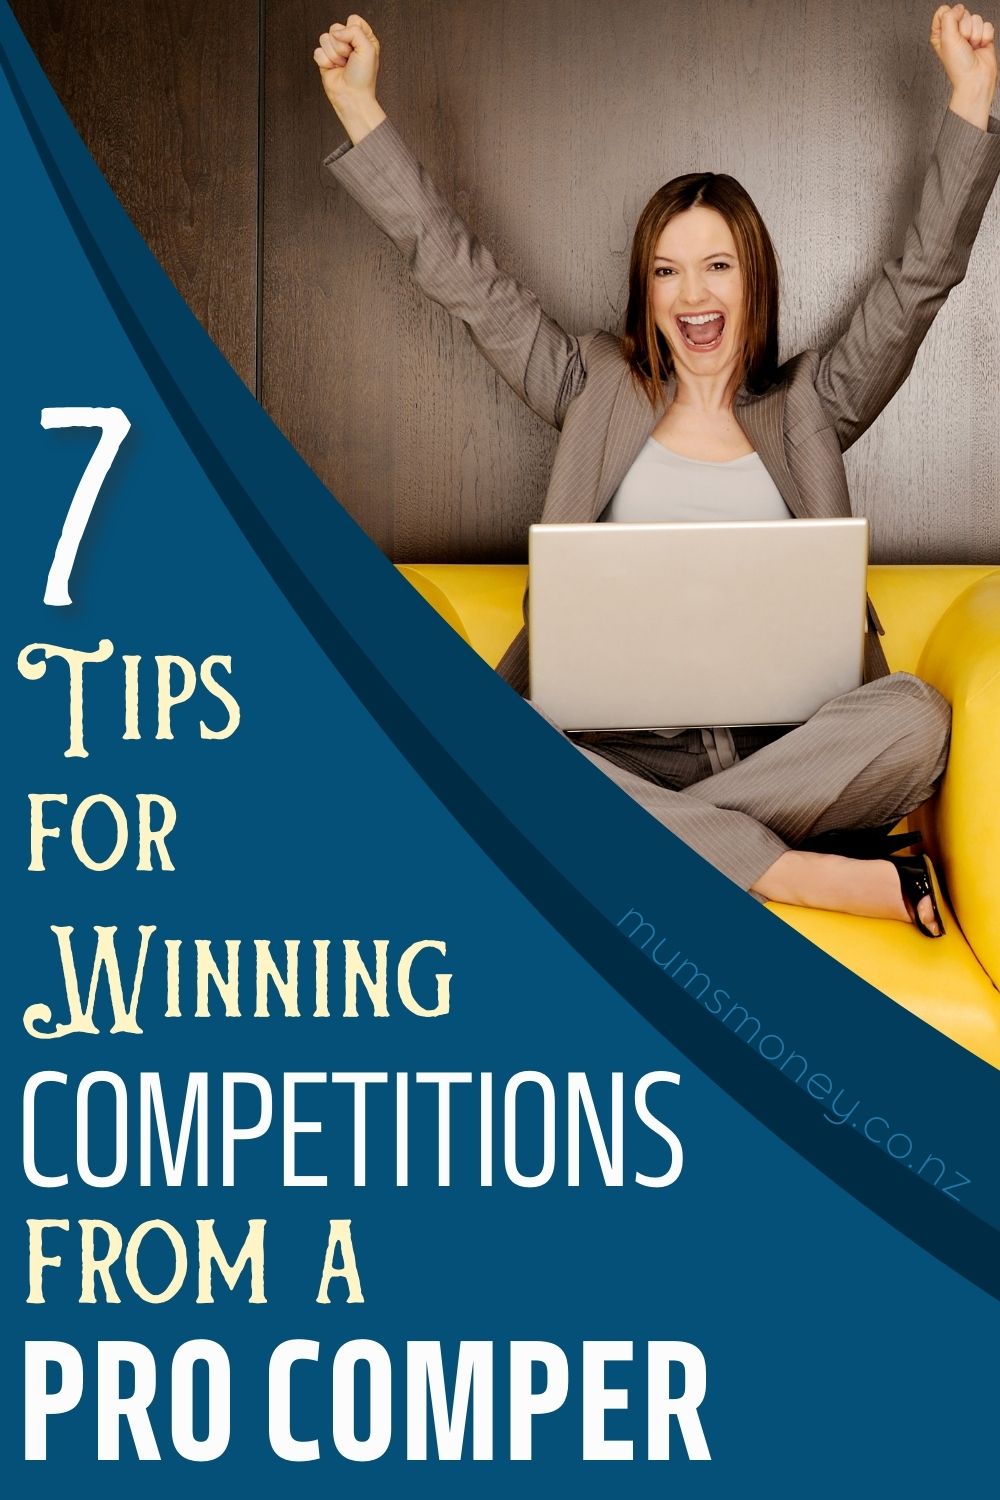 7 Tips for Winning Competitions From a Pro Comper